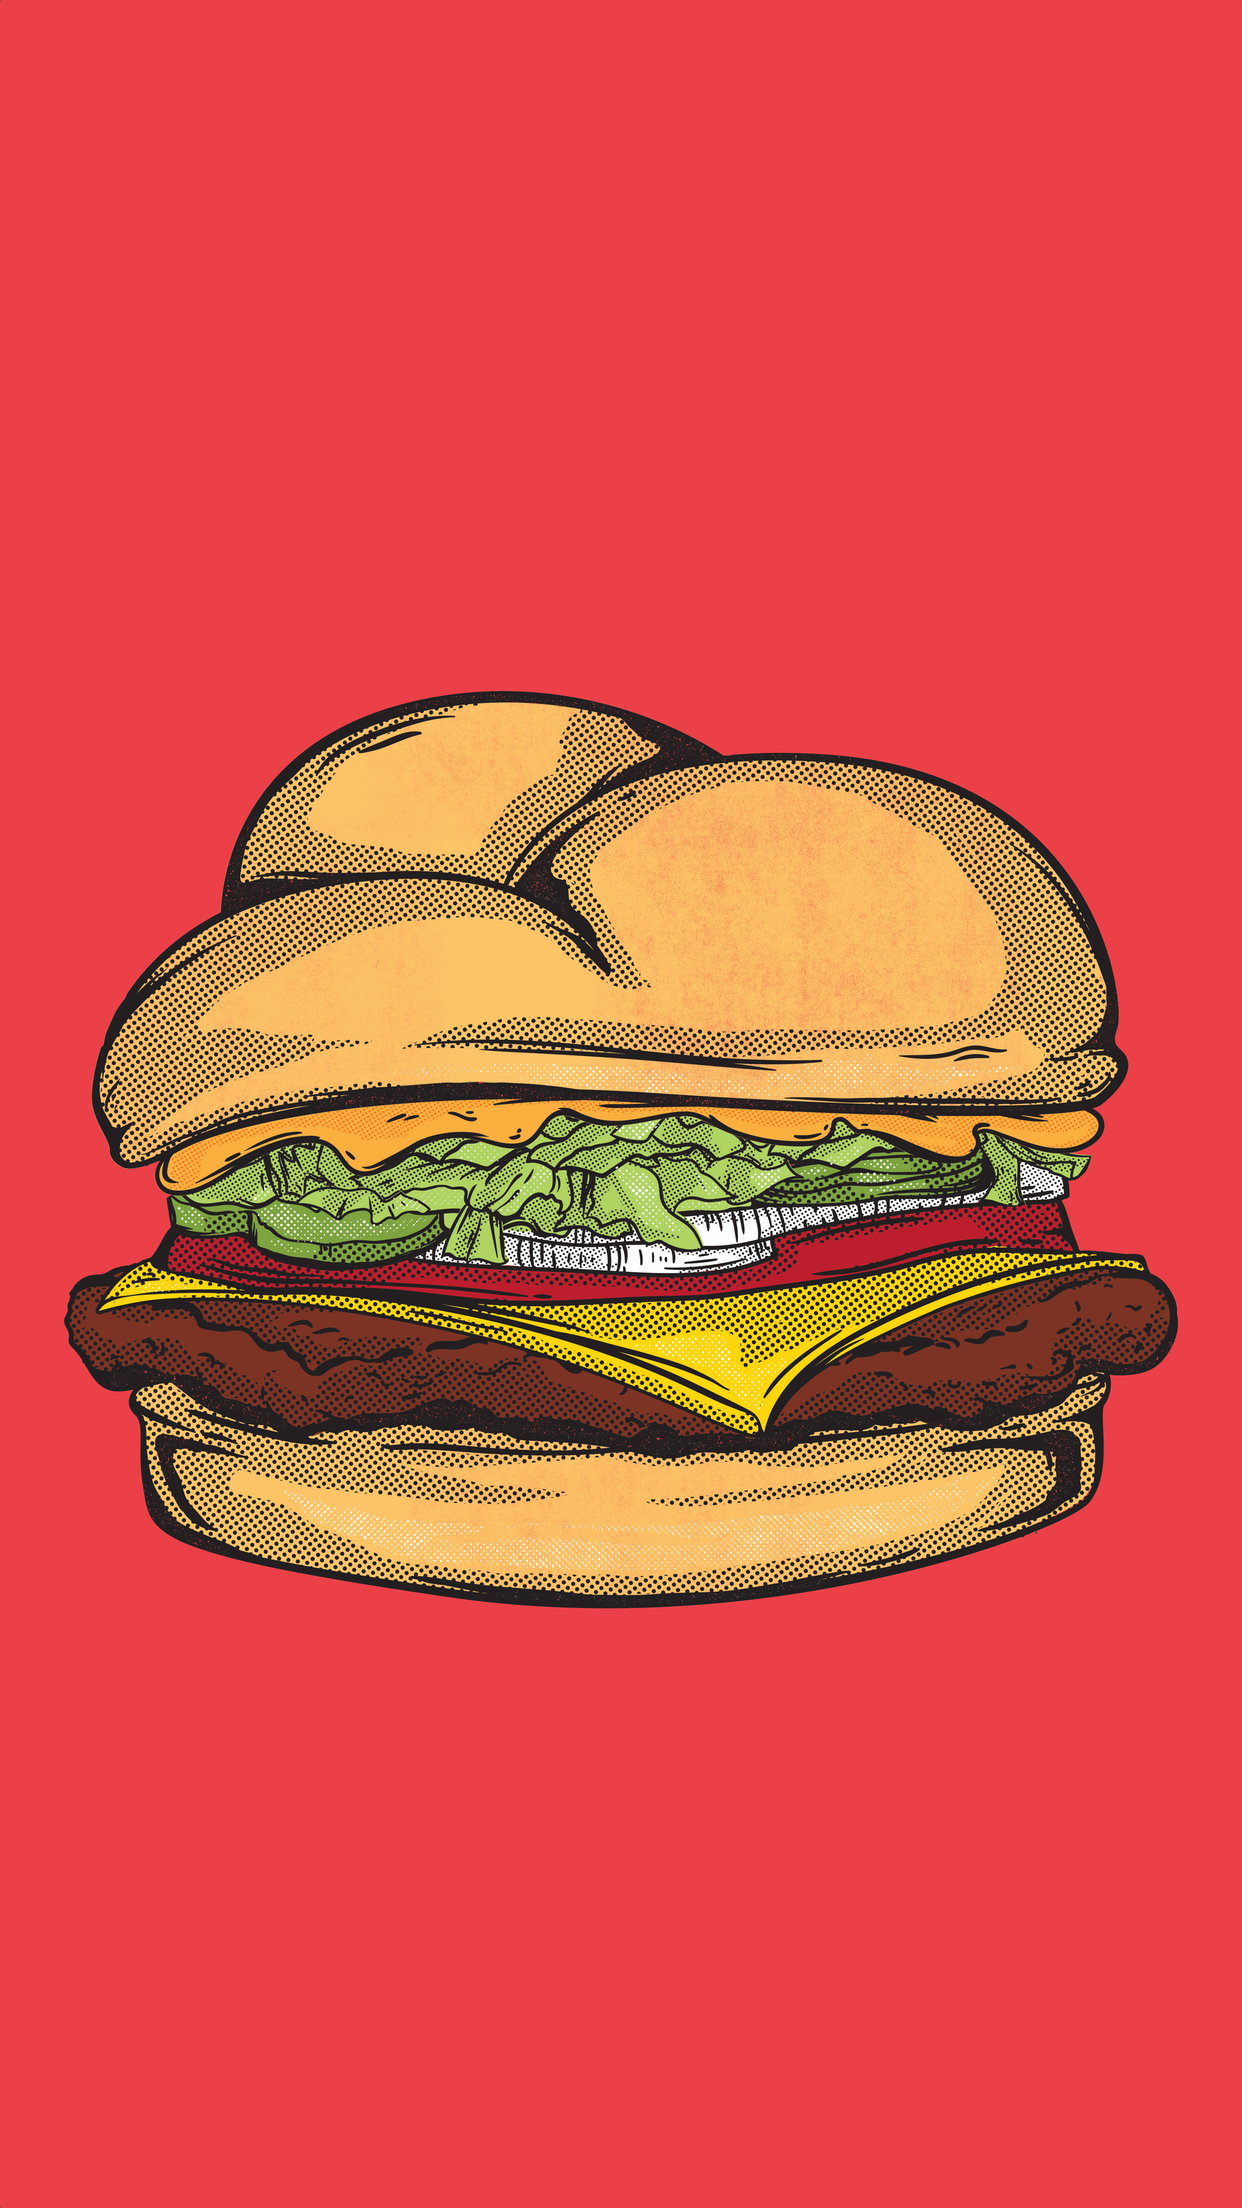 Cheeseburger on red background